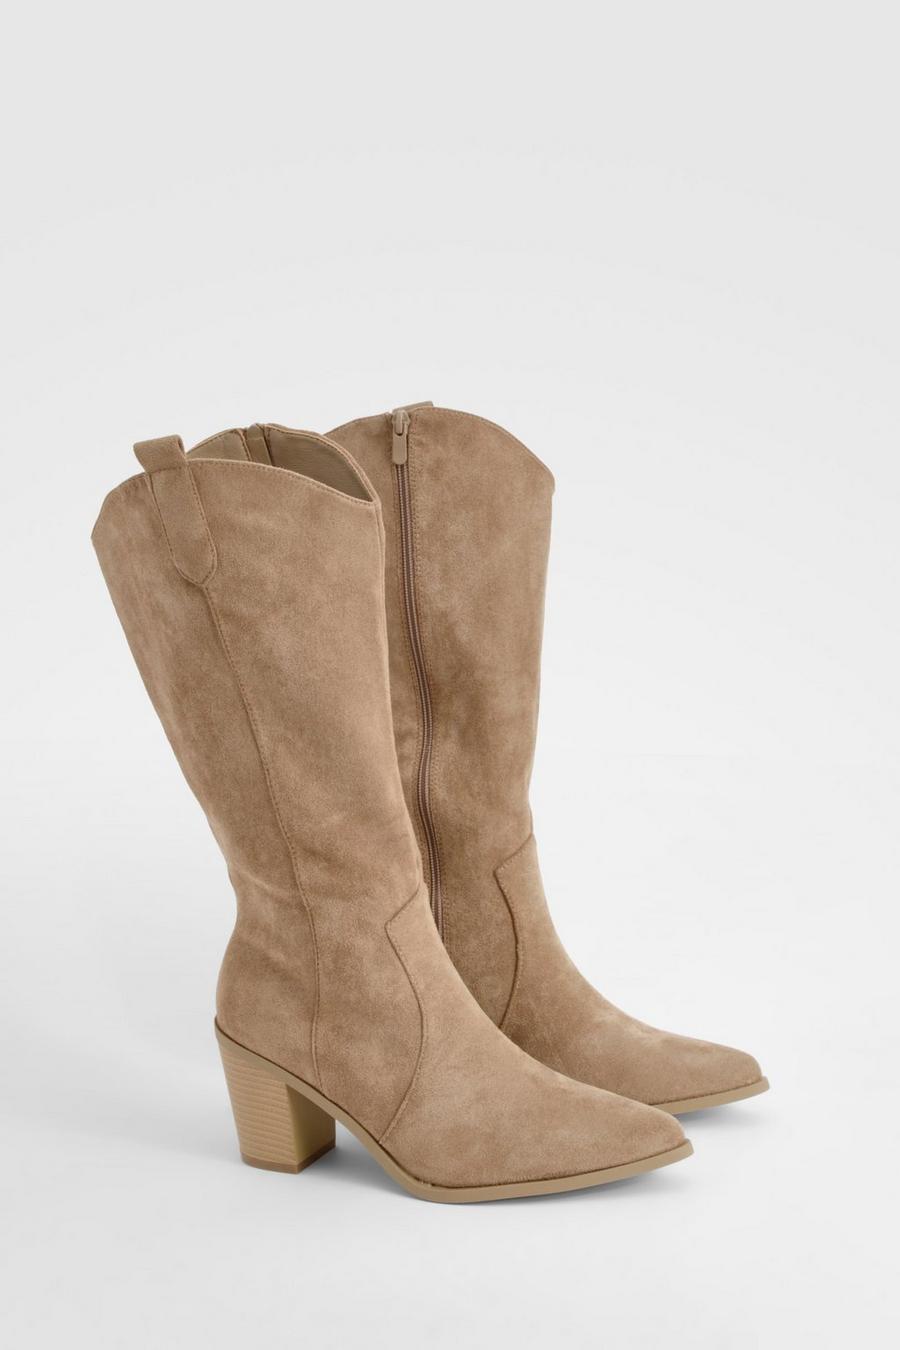 Taupe Western Style Pointed Toe Knee High Heeled Boot 